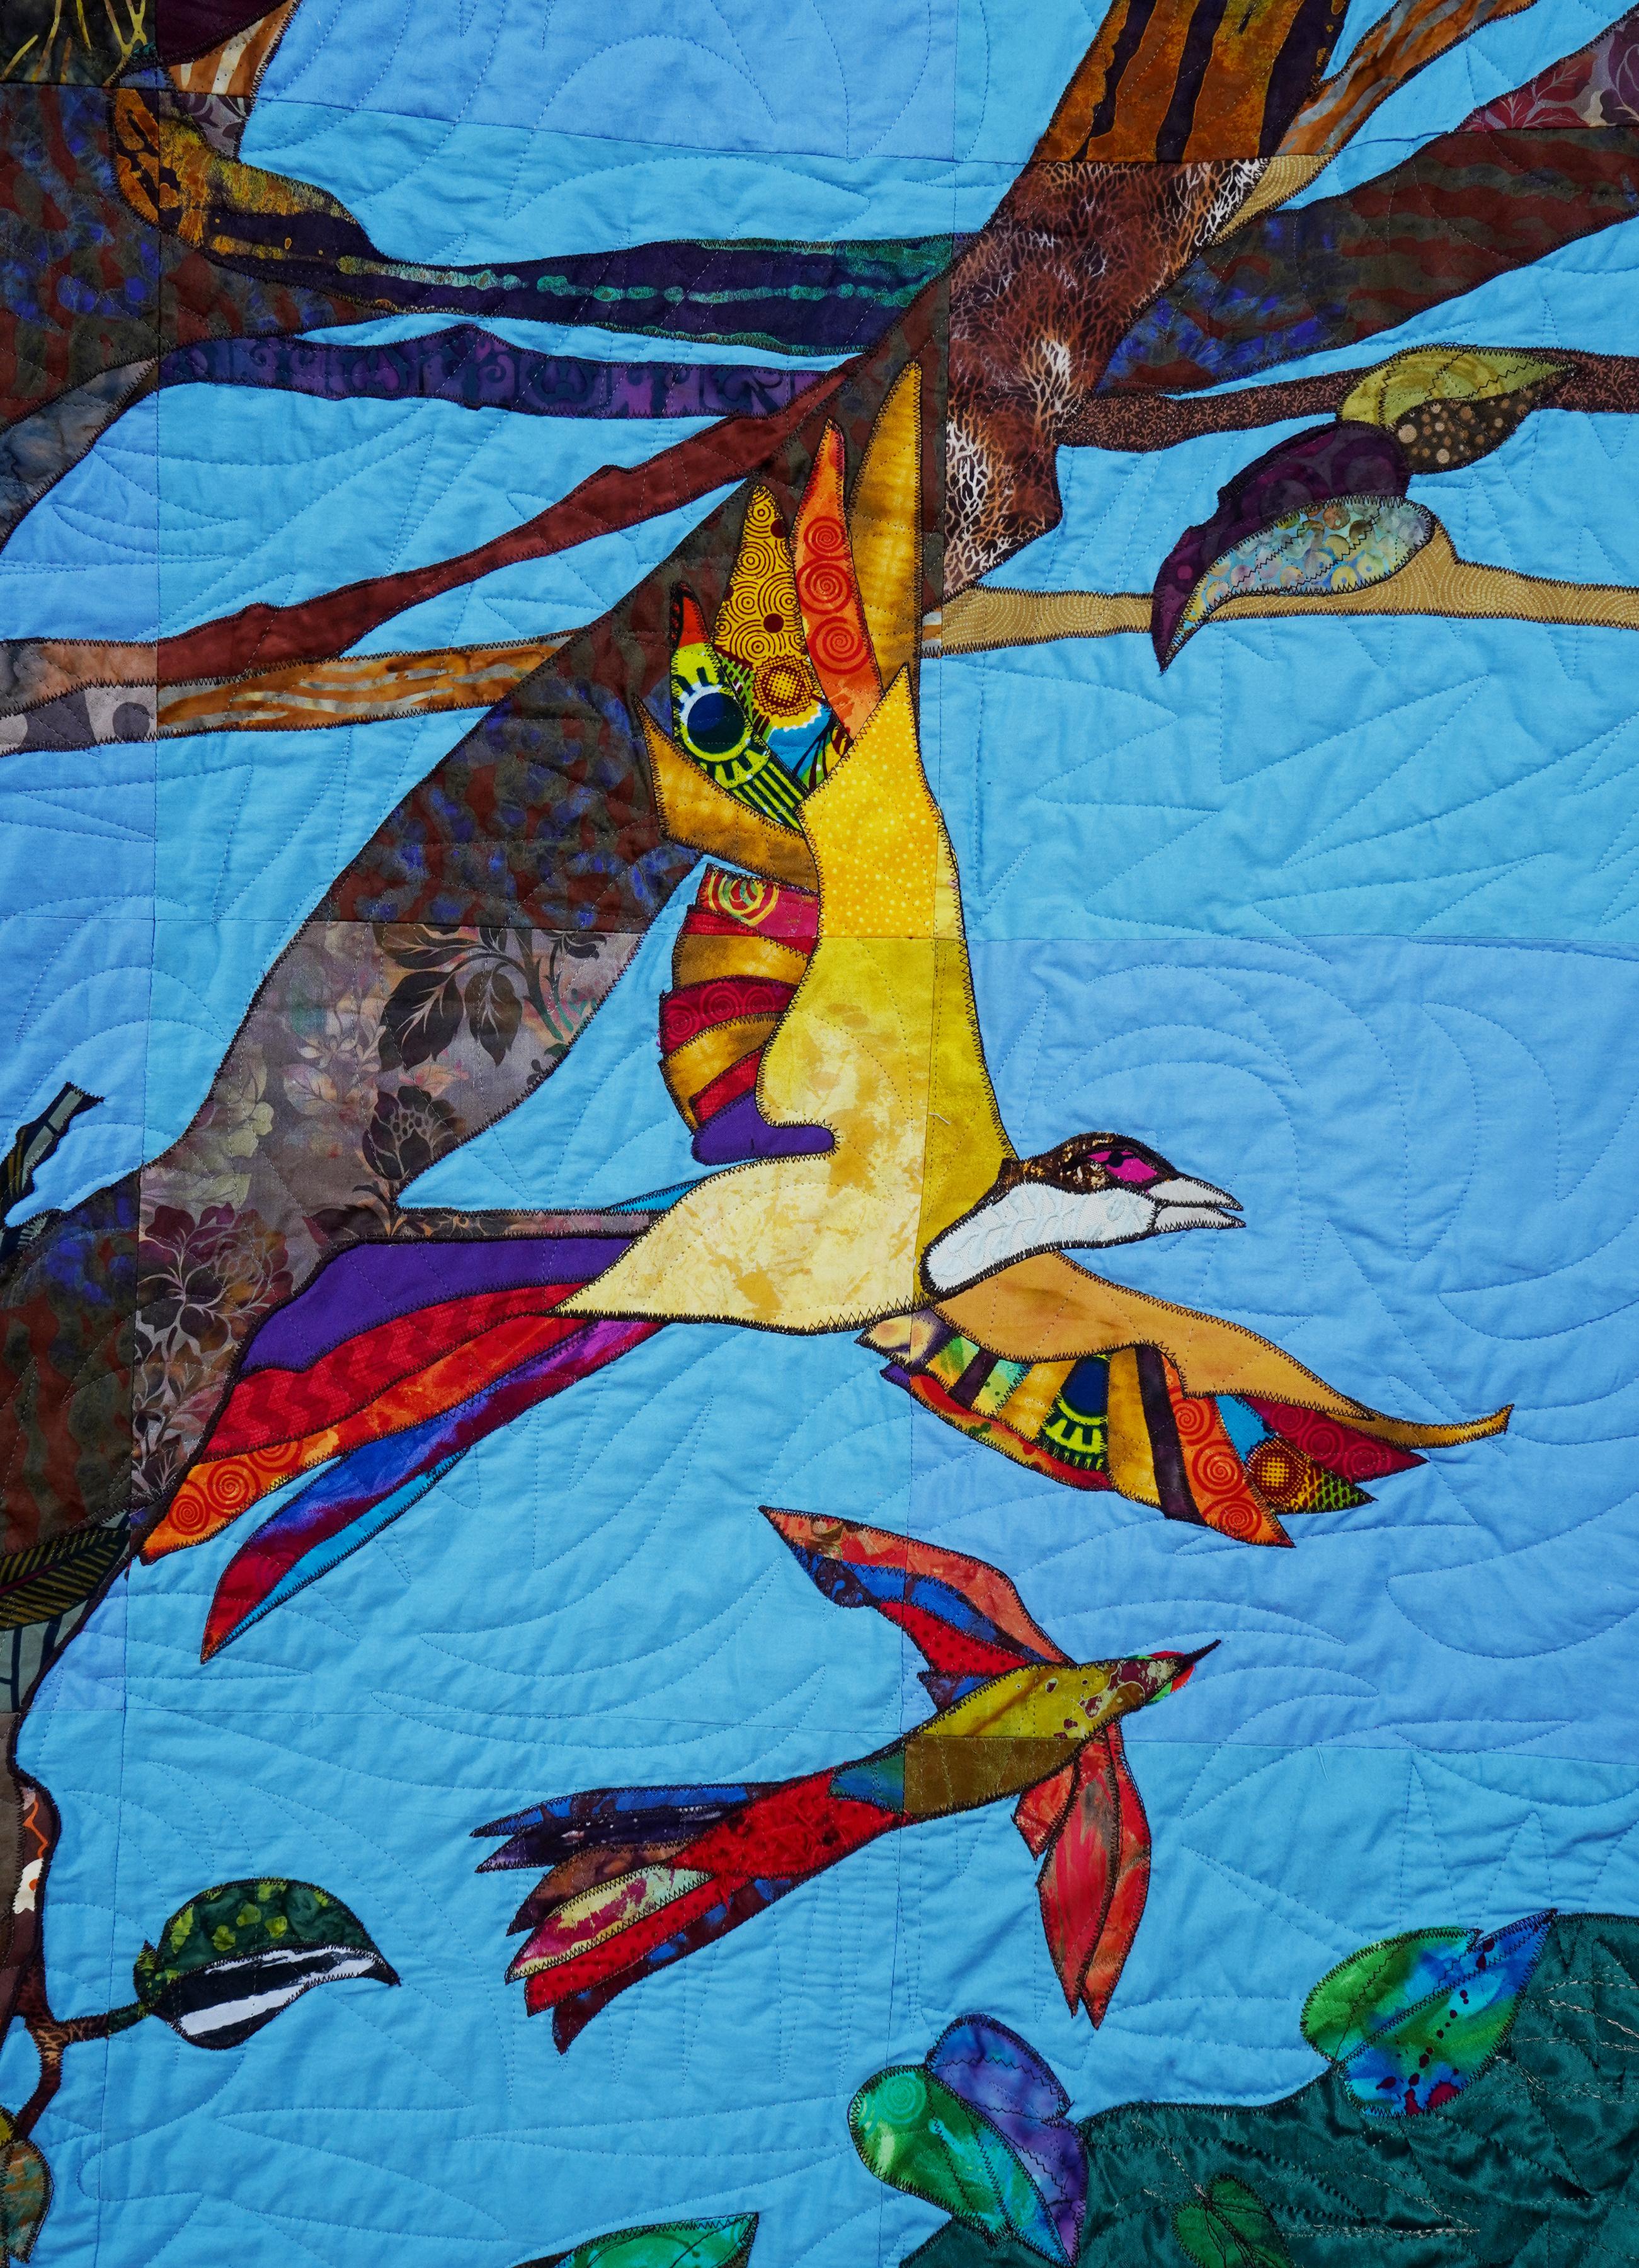 A multicolor community-created quilt that uses birds as a metaphor for the Black experience in America